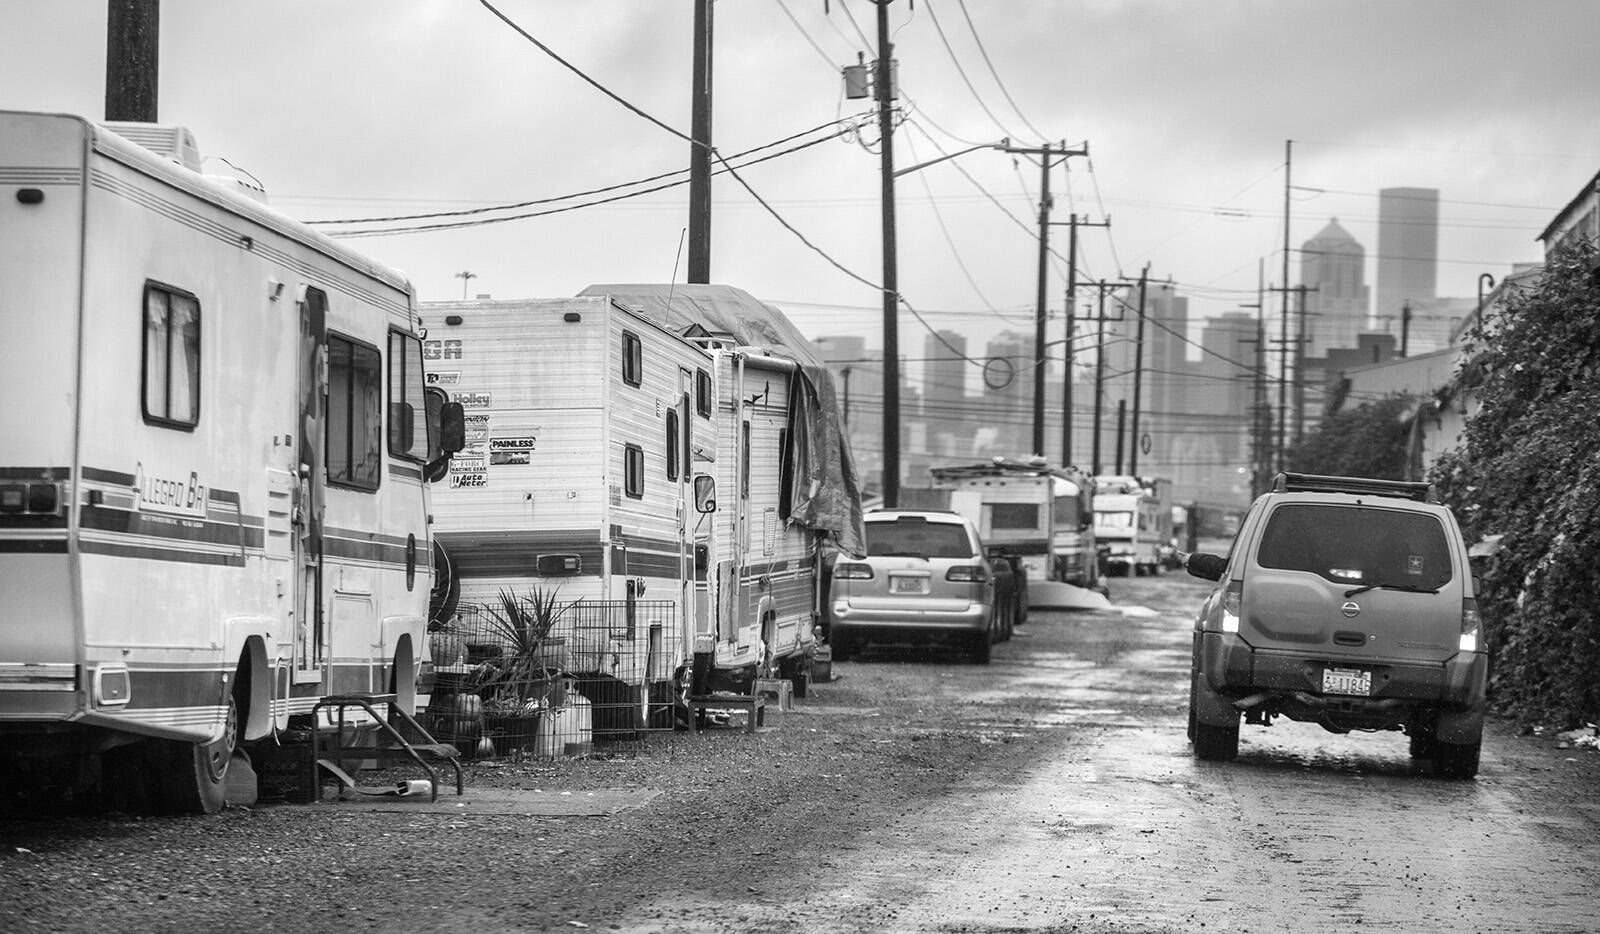 Steve Ringman | Seattle Times | TNS | File Photo 
A number of recreational vehicles are shown parked in an alley in the SODO area of Seattle.